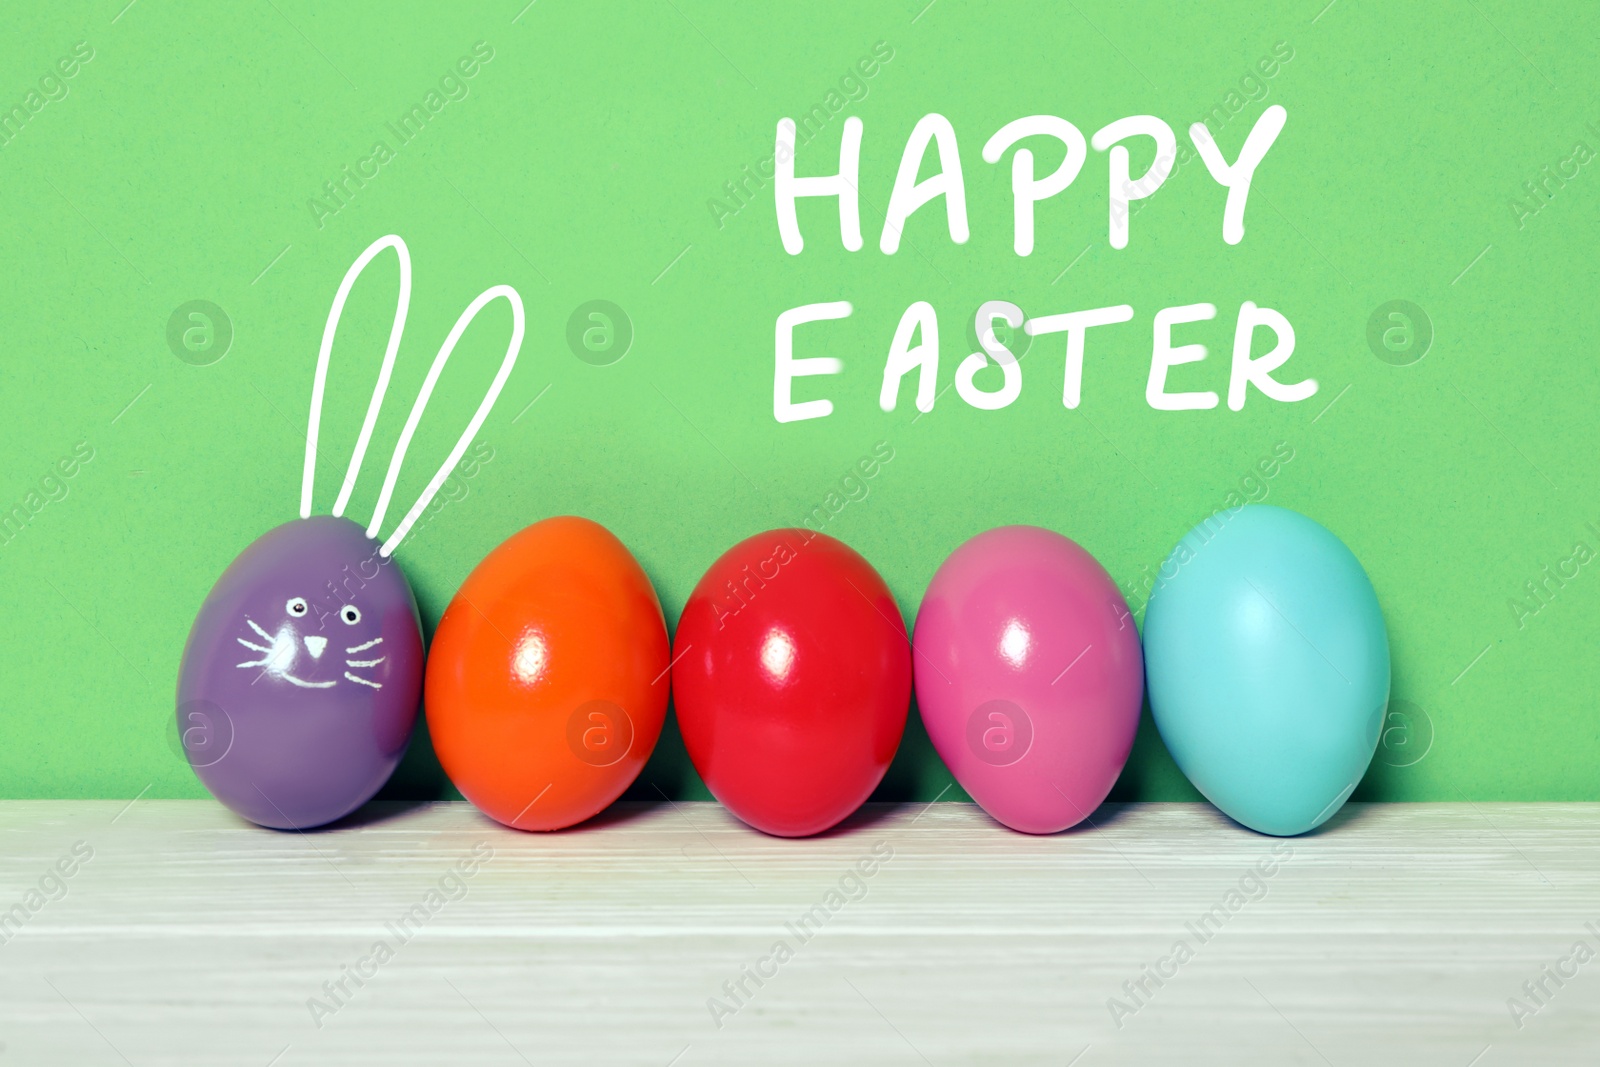 Image of Violet egg with drawn face and ears as Easter bunny among others on white wooden table against green background